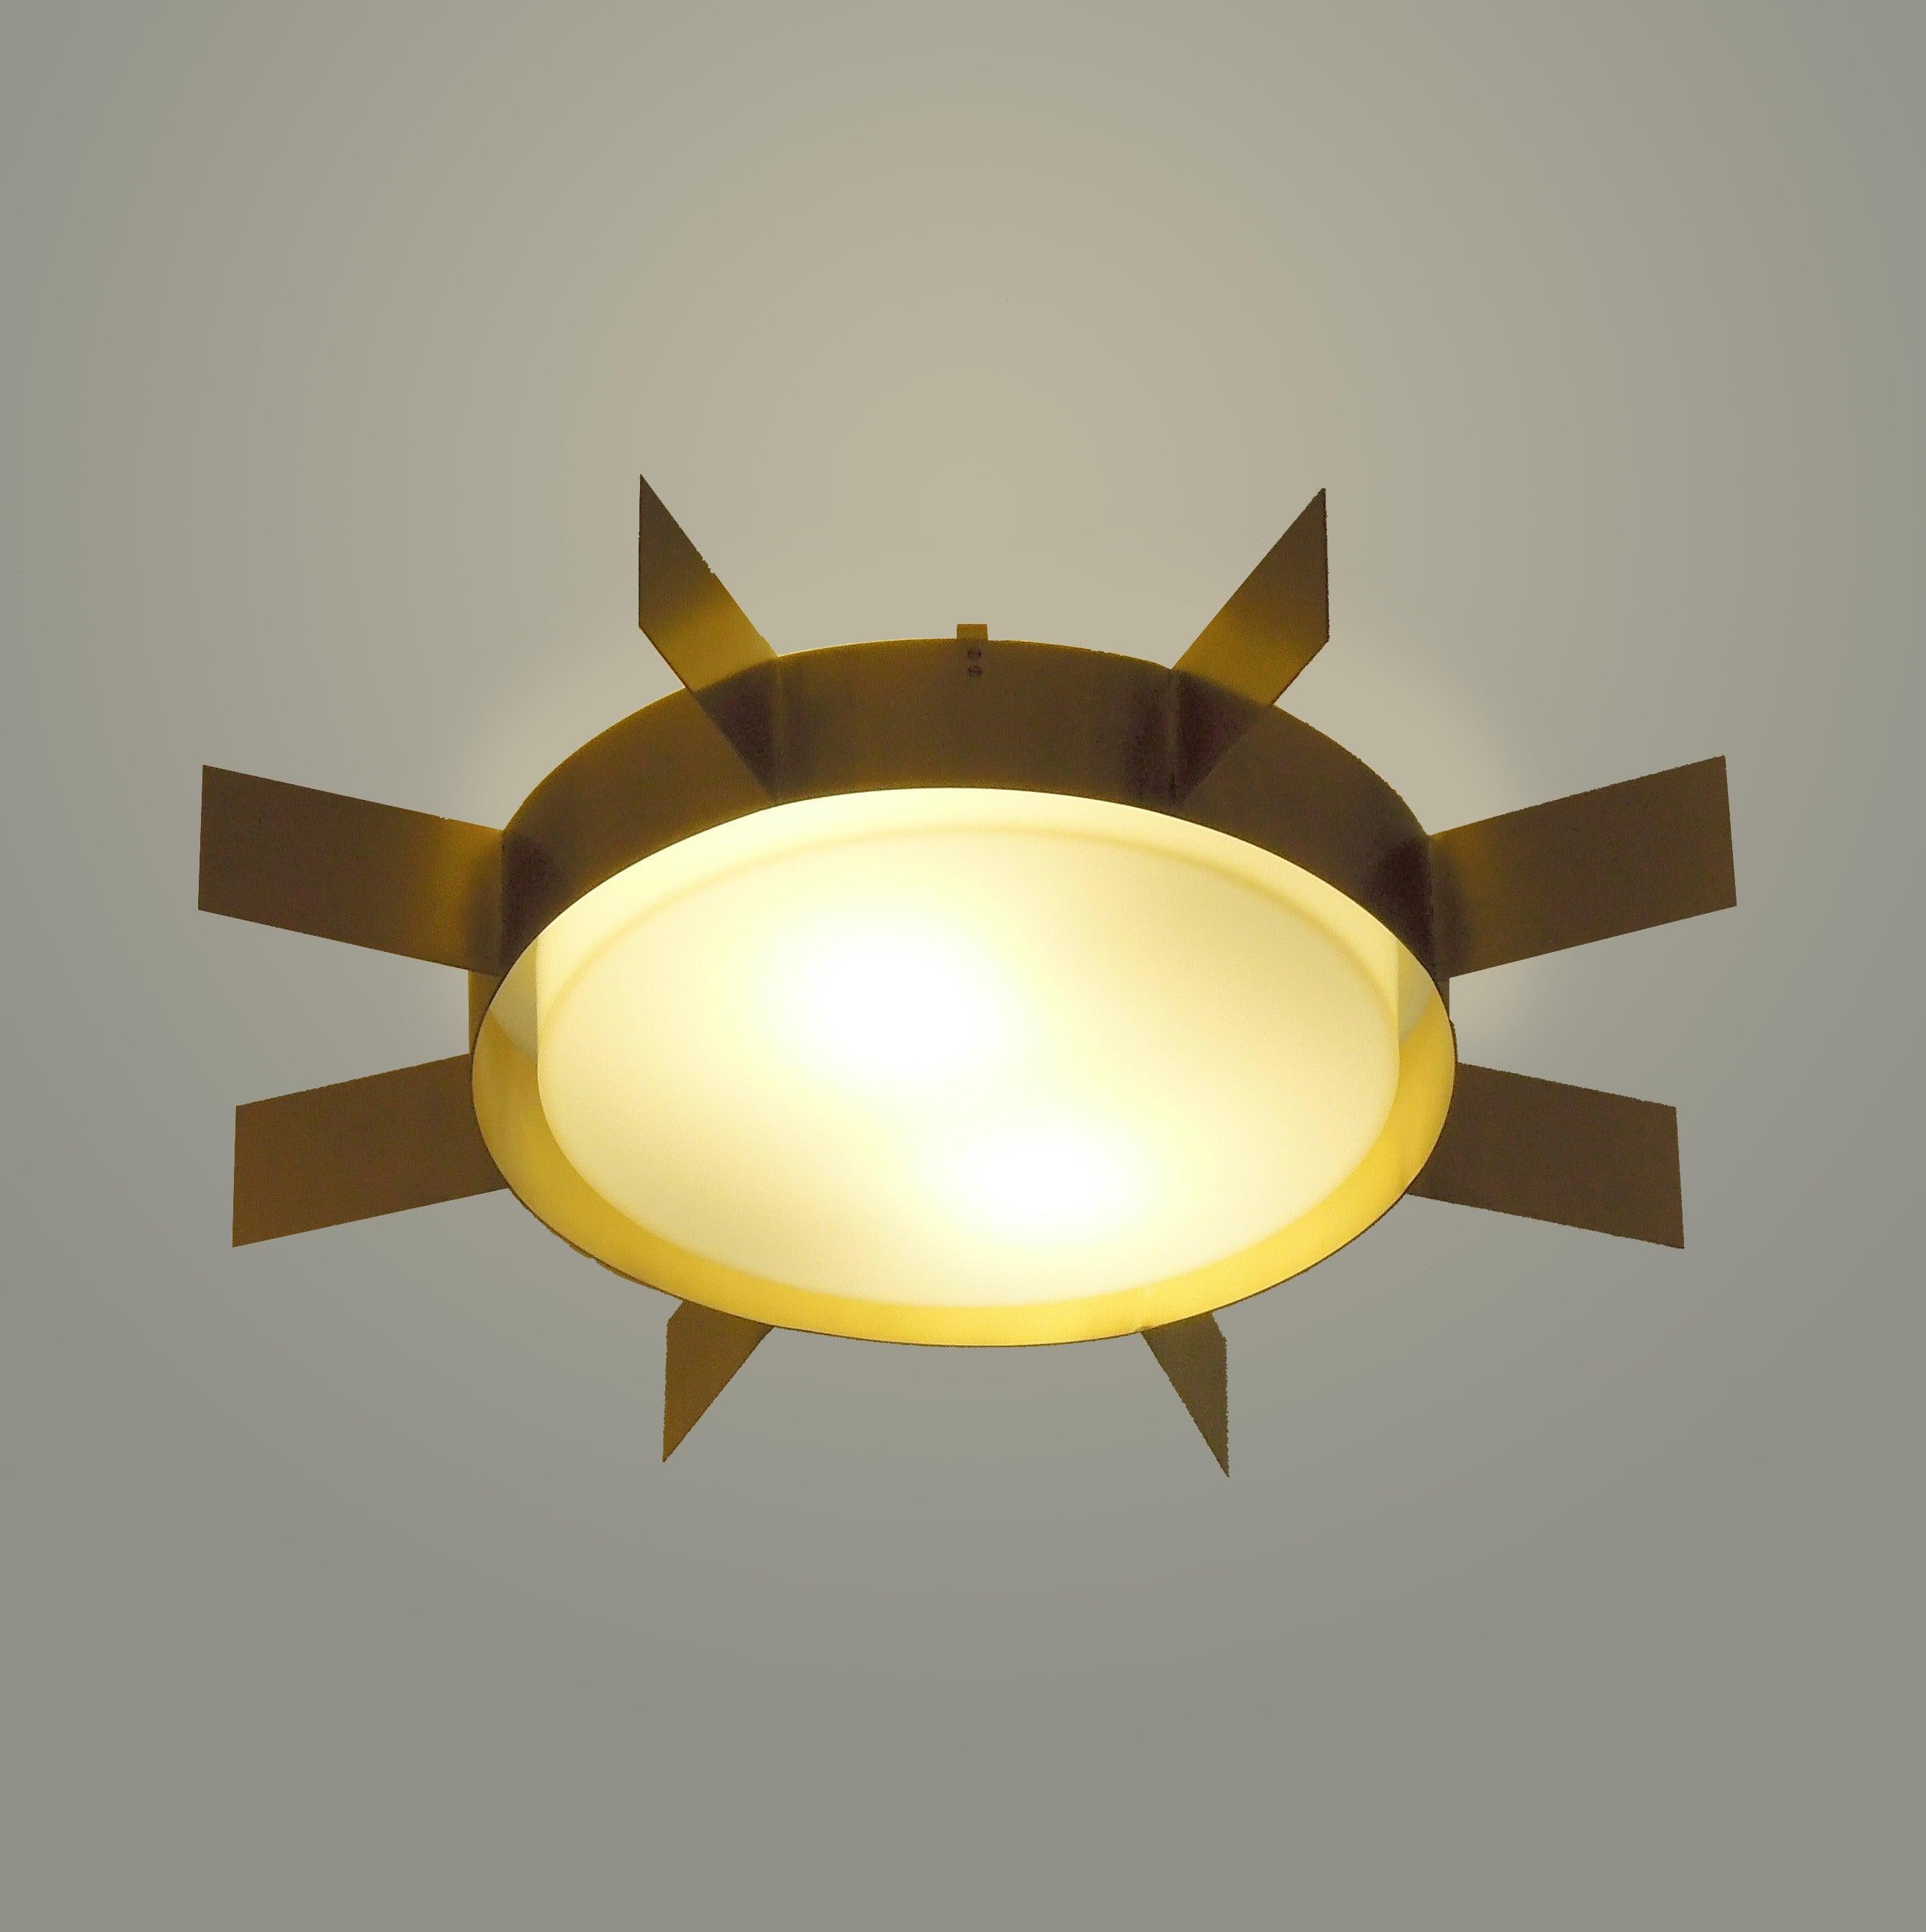 Wall ceiling lamp sun, collection of 'Screen of Light' design by Gio Ponti Italy, in satined brass with a round opaline glass. Wall and ceiling sculpture light in satined brass, a lamp of timeless, iconic design. Handcrafted product, realised by